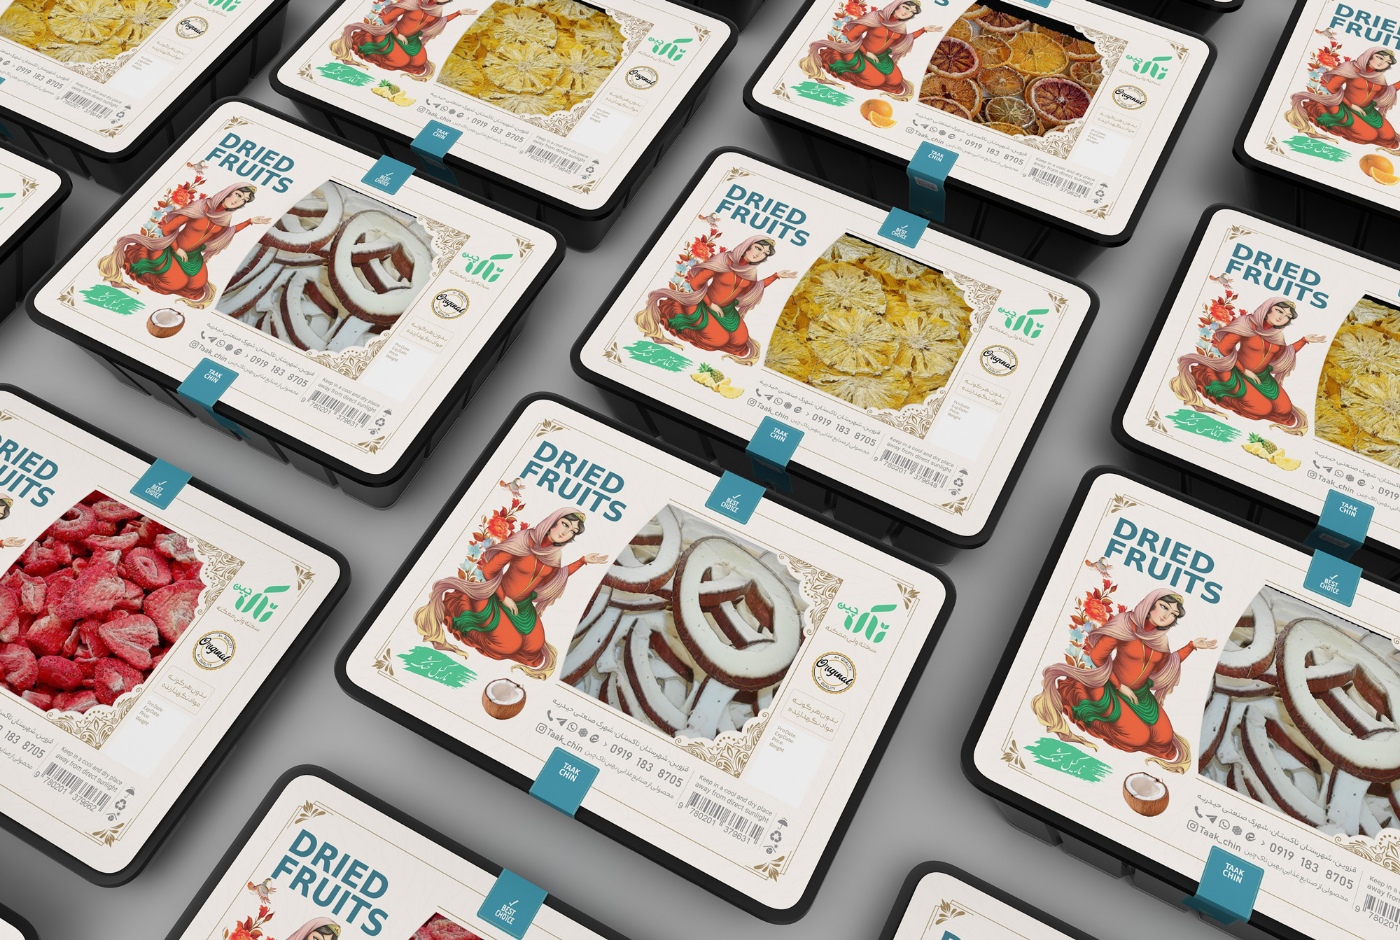 Taakchin Dried Fruit Packaging Design Created by ZarifGraphic Studio